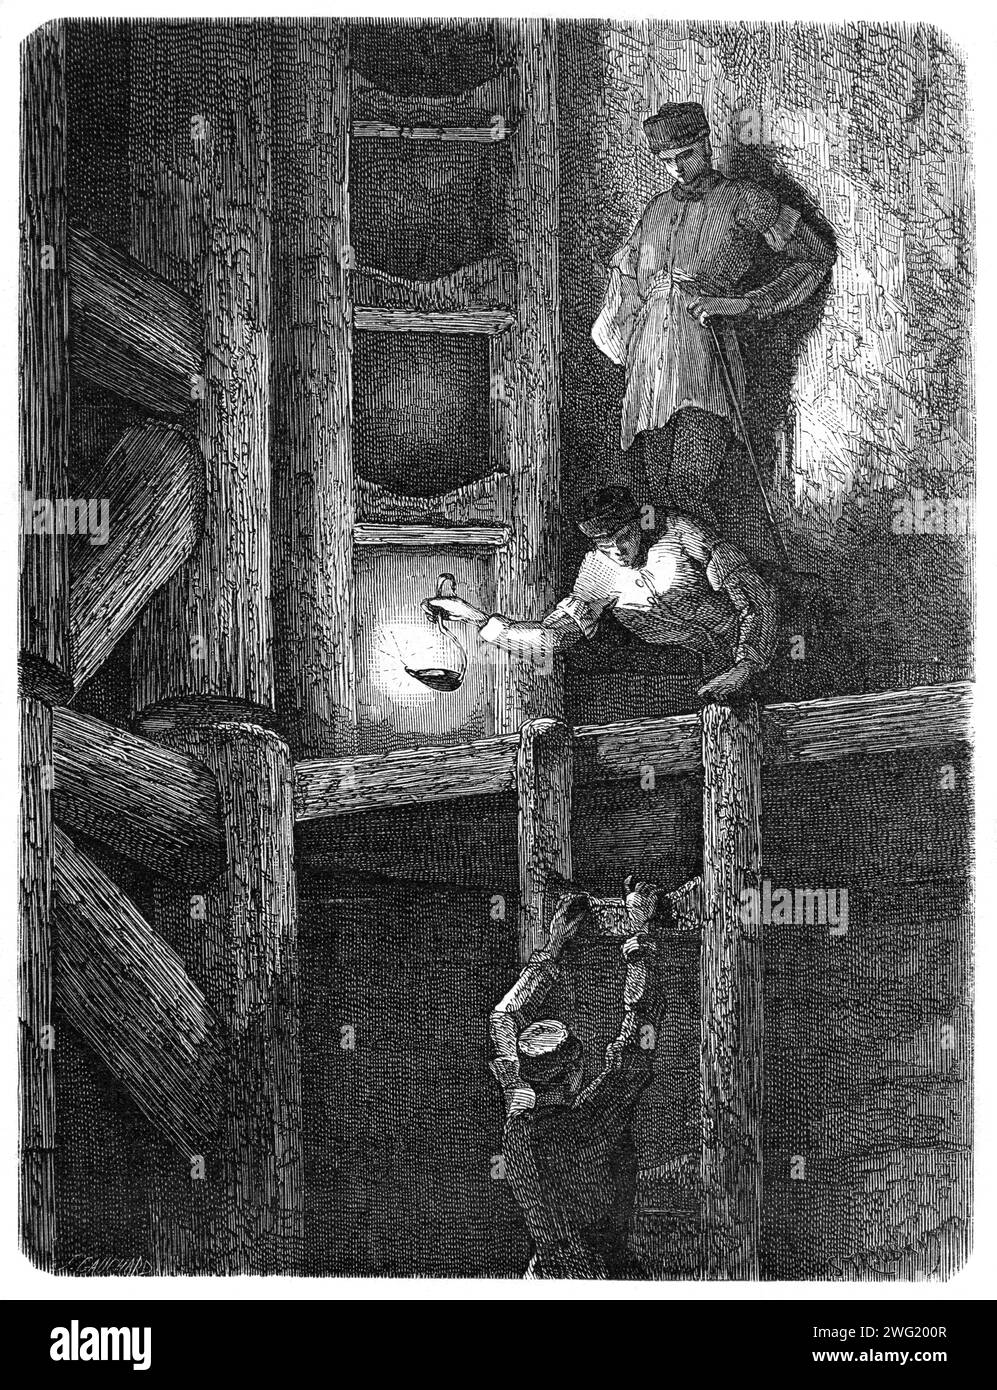 Descending Mine Shaft in the Mines of Rammelsberg by Lamp Light in the Harz Highlands Region of Northern Germany. Vintage or Historic Engraving or Illustration 1863 Stock Photo